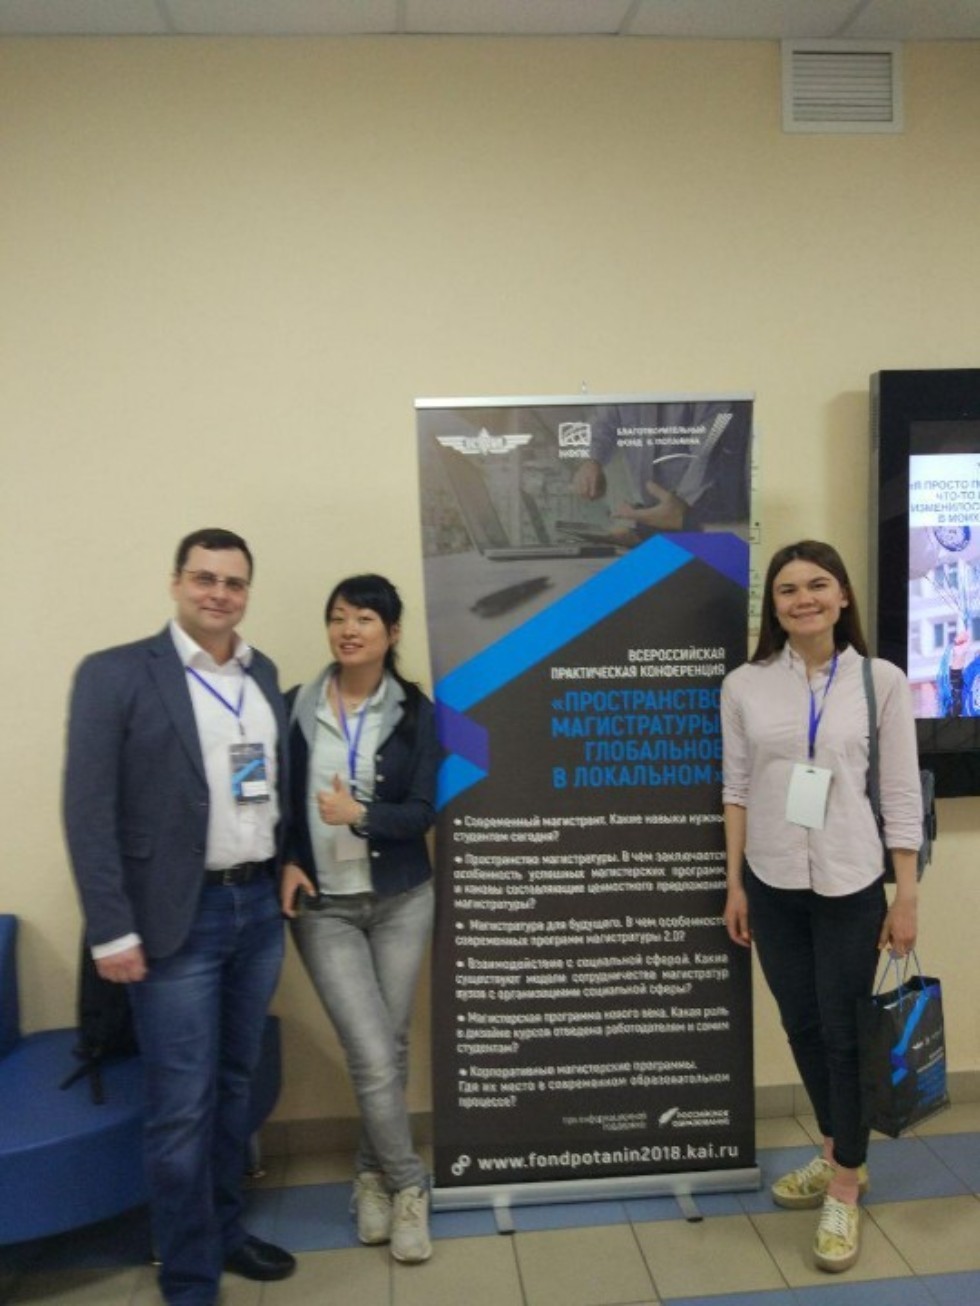 Laboratory of intelligent robotic systems participated in the All-Russian applied science conference  ,LIRS, ITIS, robotics